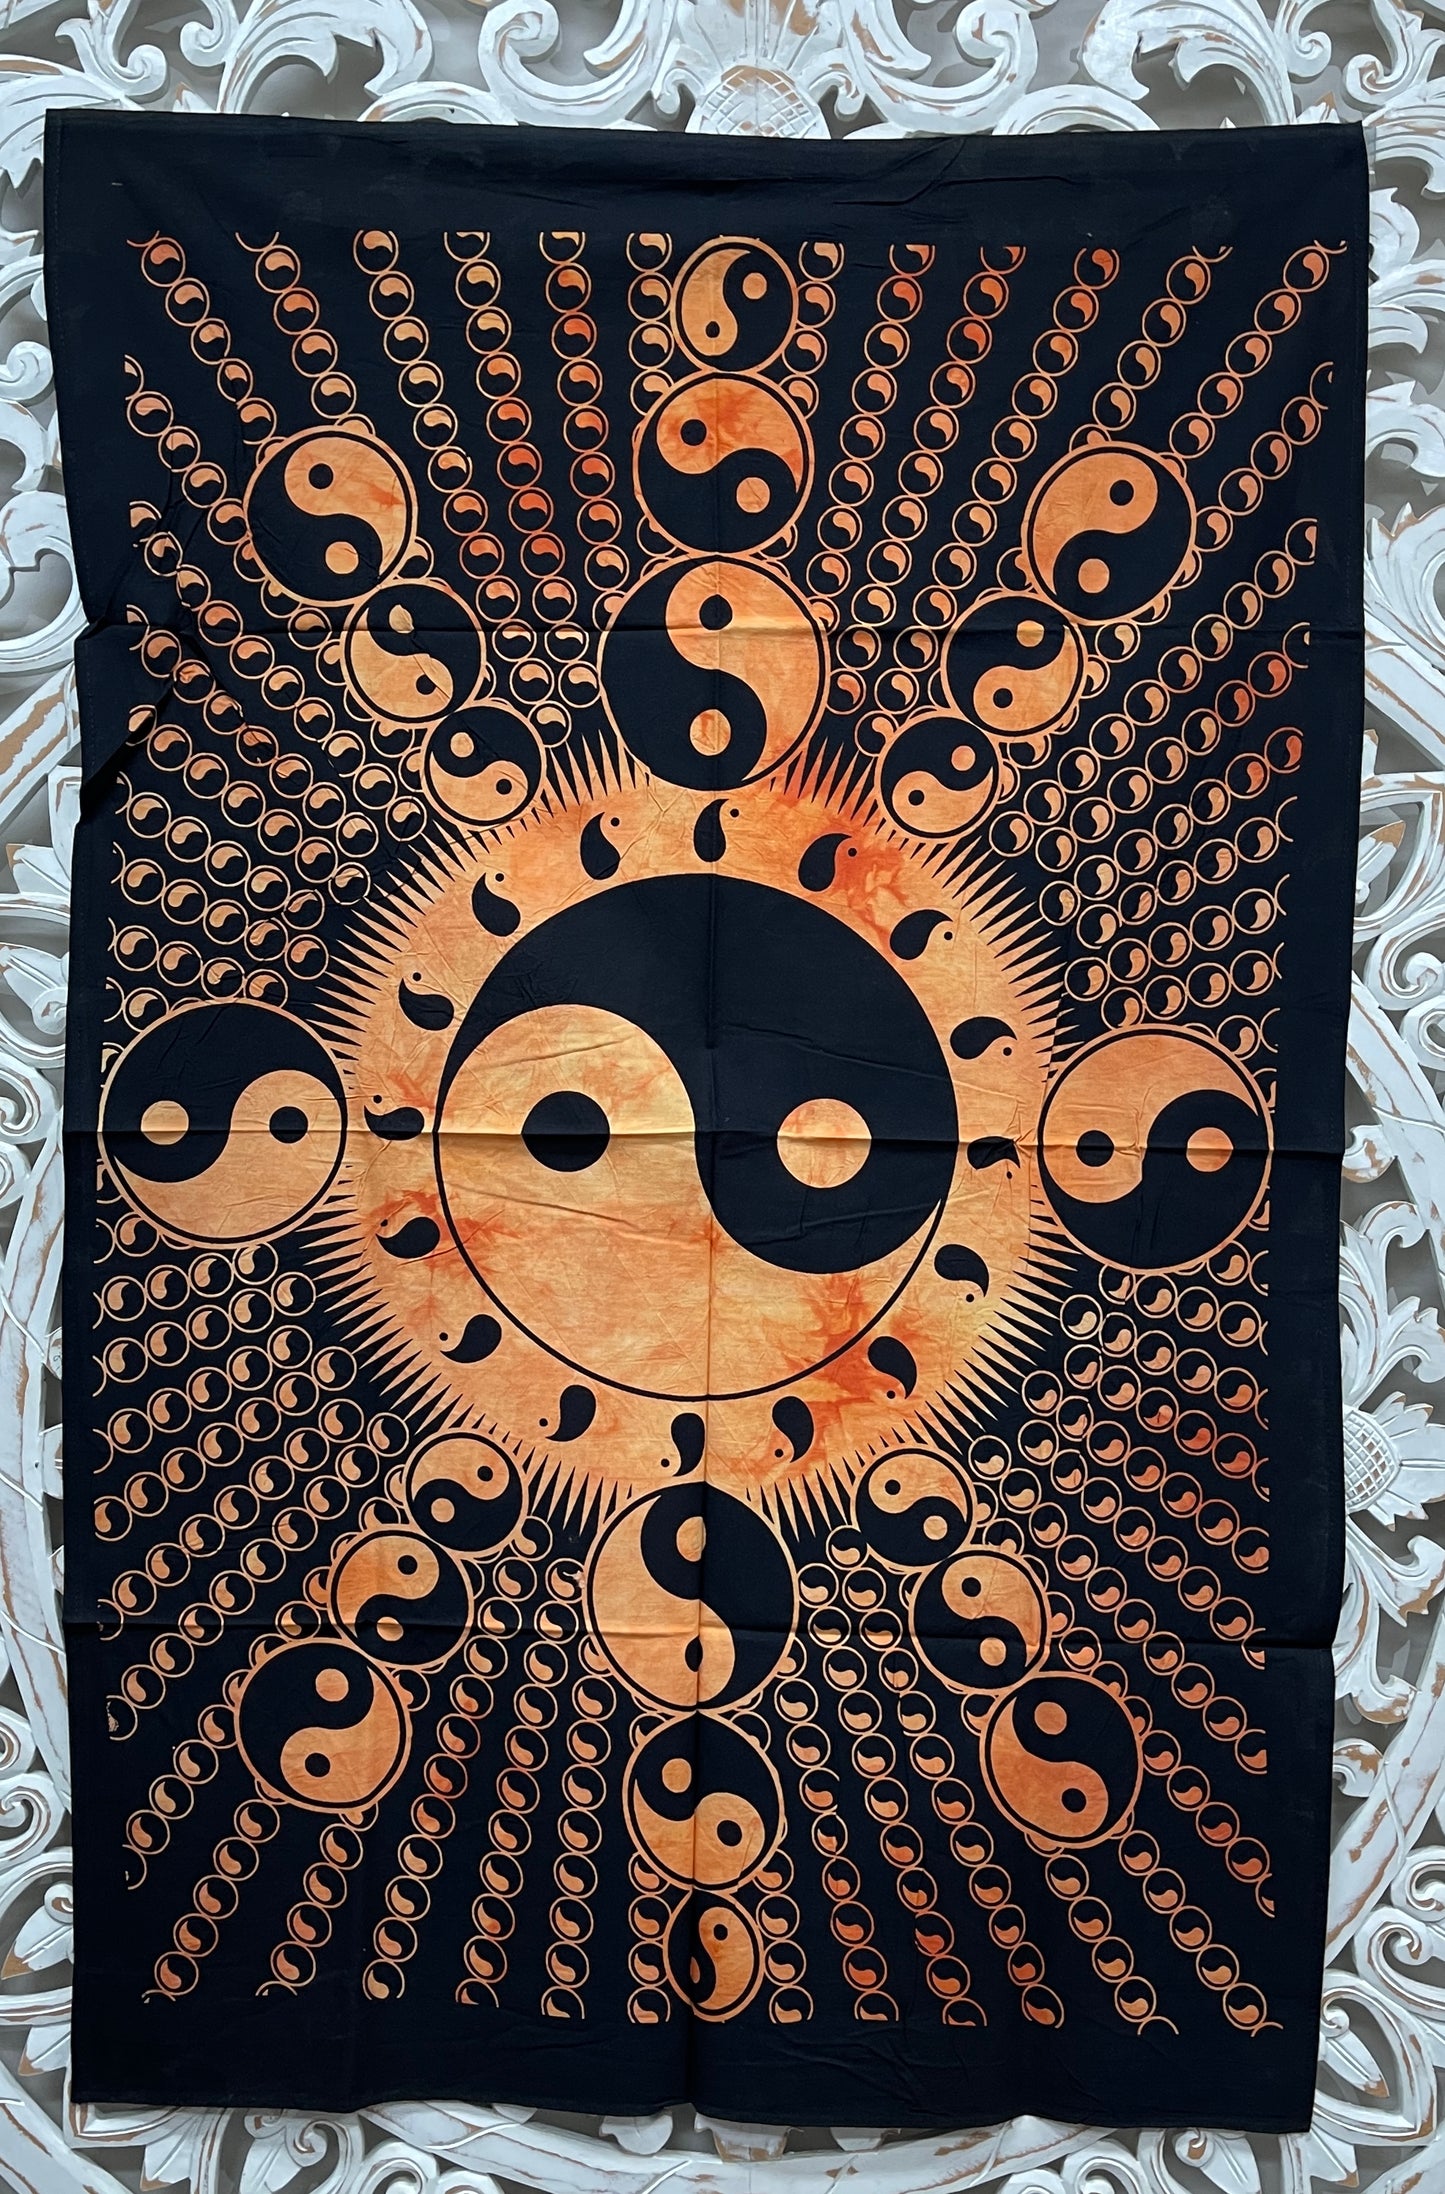 Hand printed Mini Fabric Posters Yin & Yang Tapestries Wall Hangings - Available in 5 colors